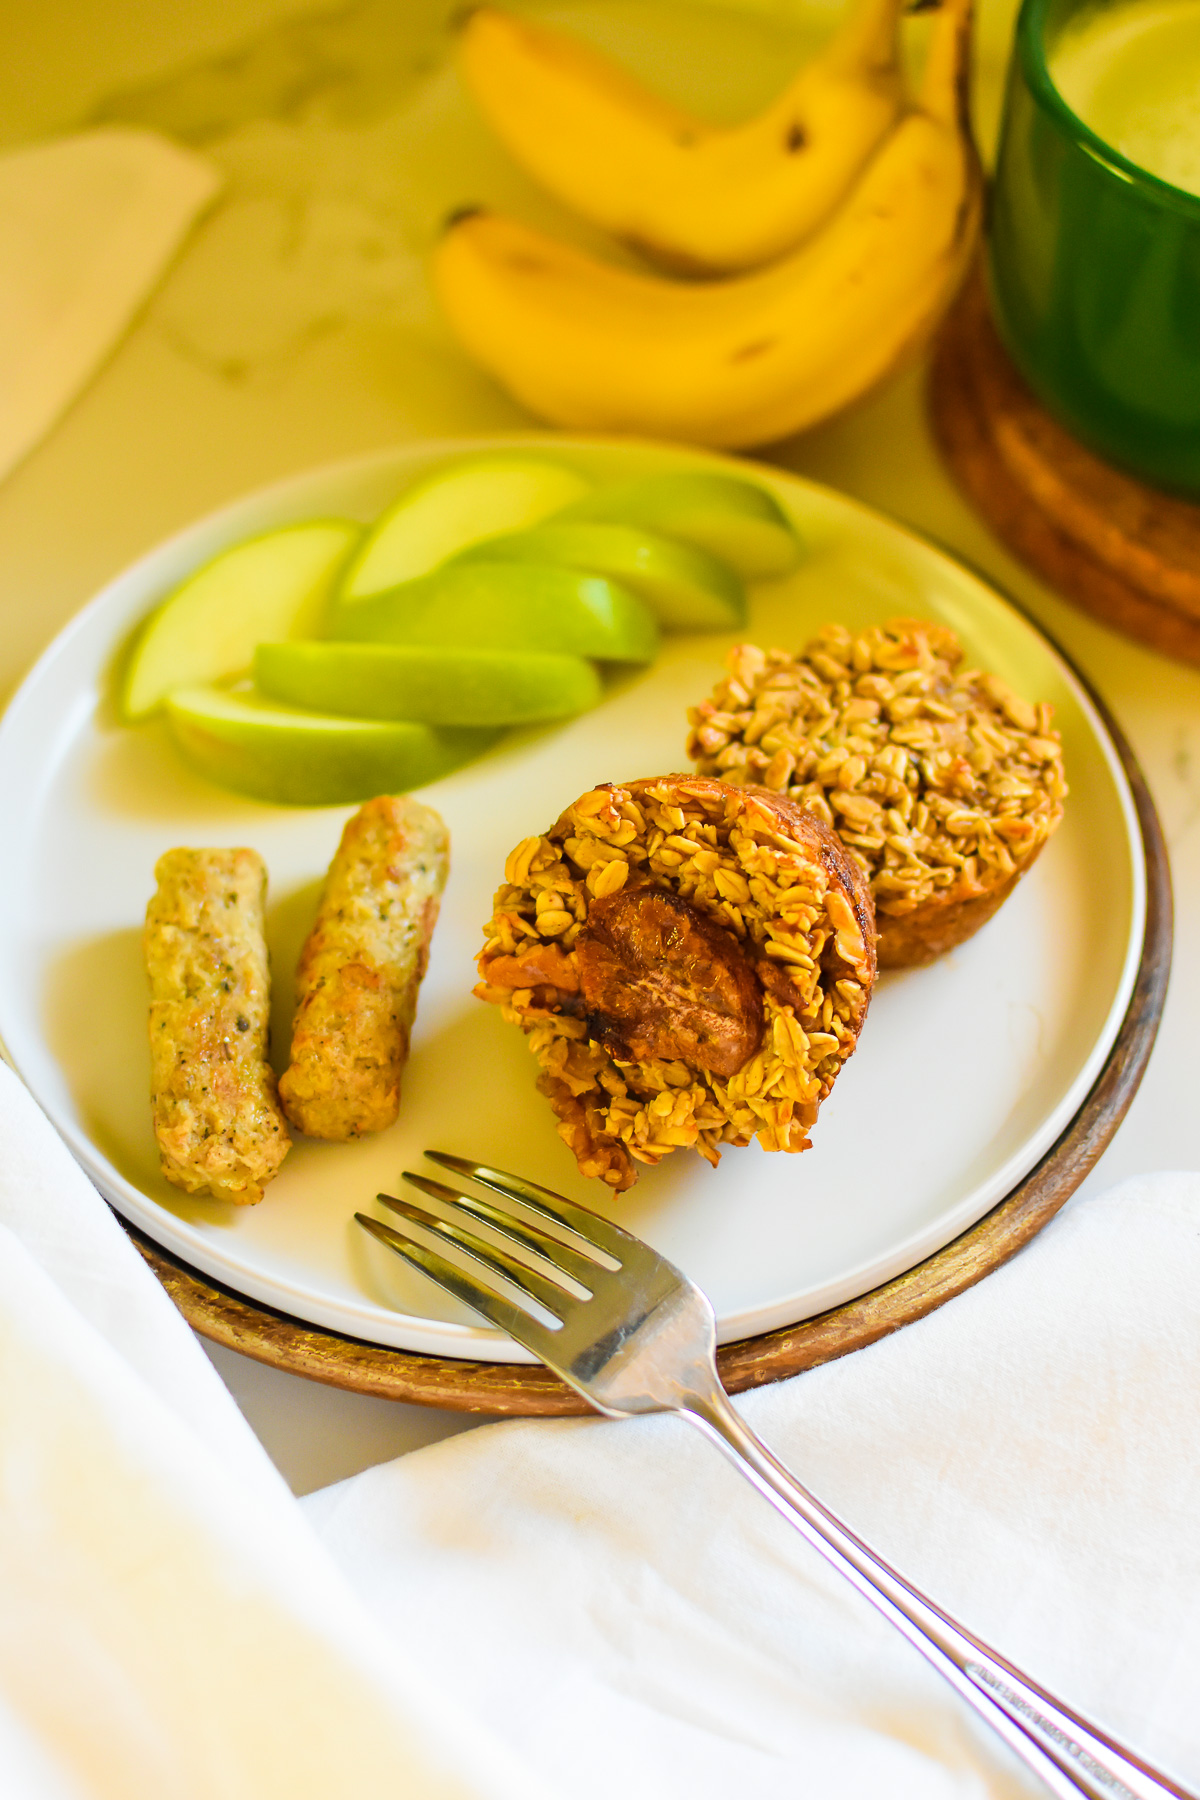 the best banana bread baked oatmeal muffins made easy in just 30 minutes served on a white plate with slices of green apple and two breakfast sausage links.